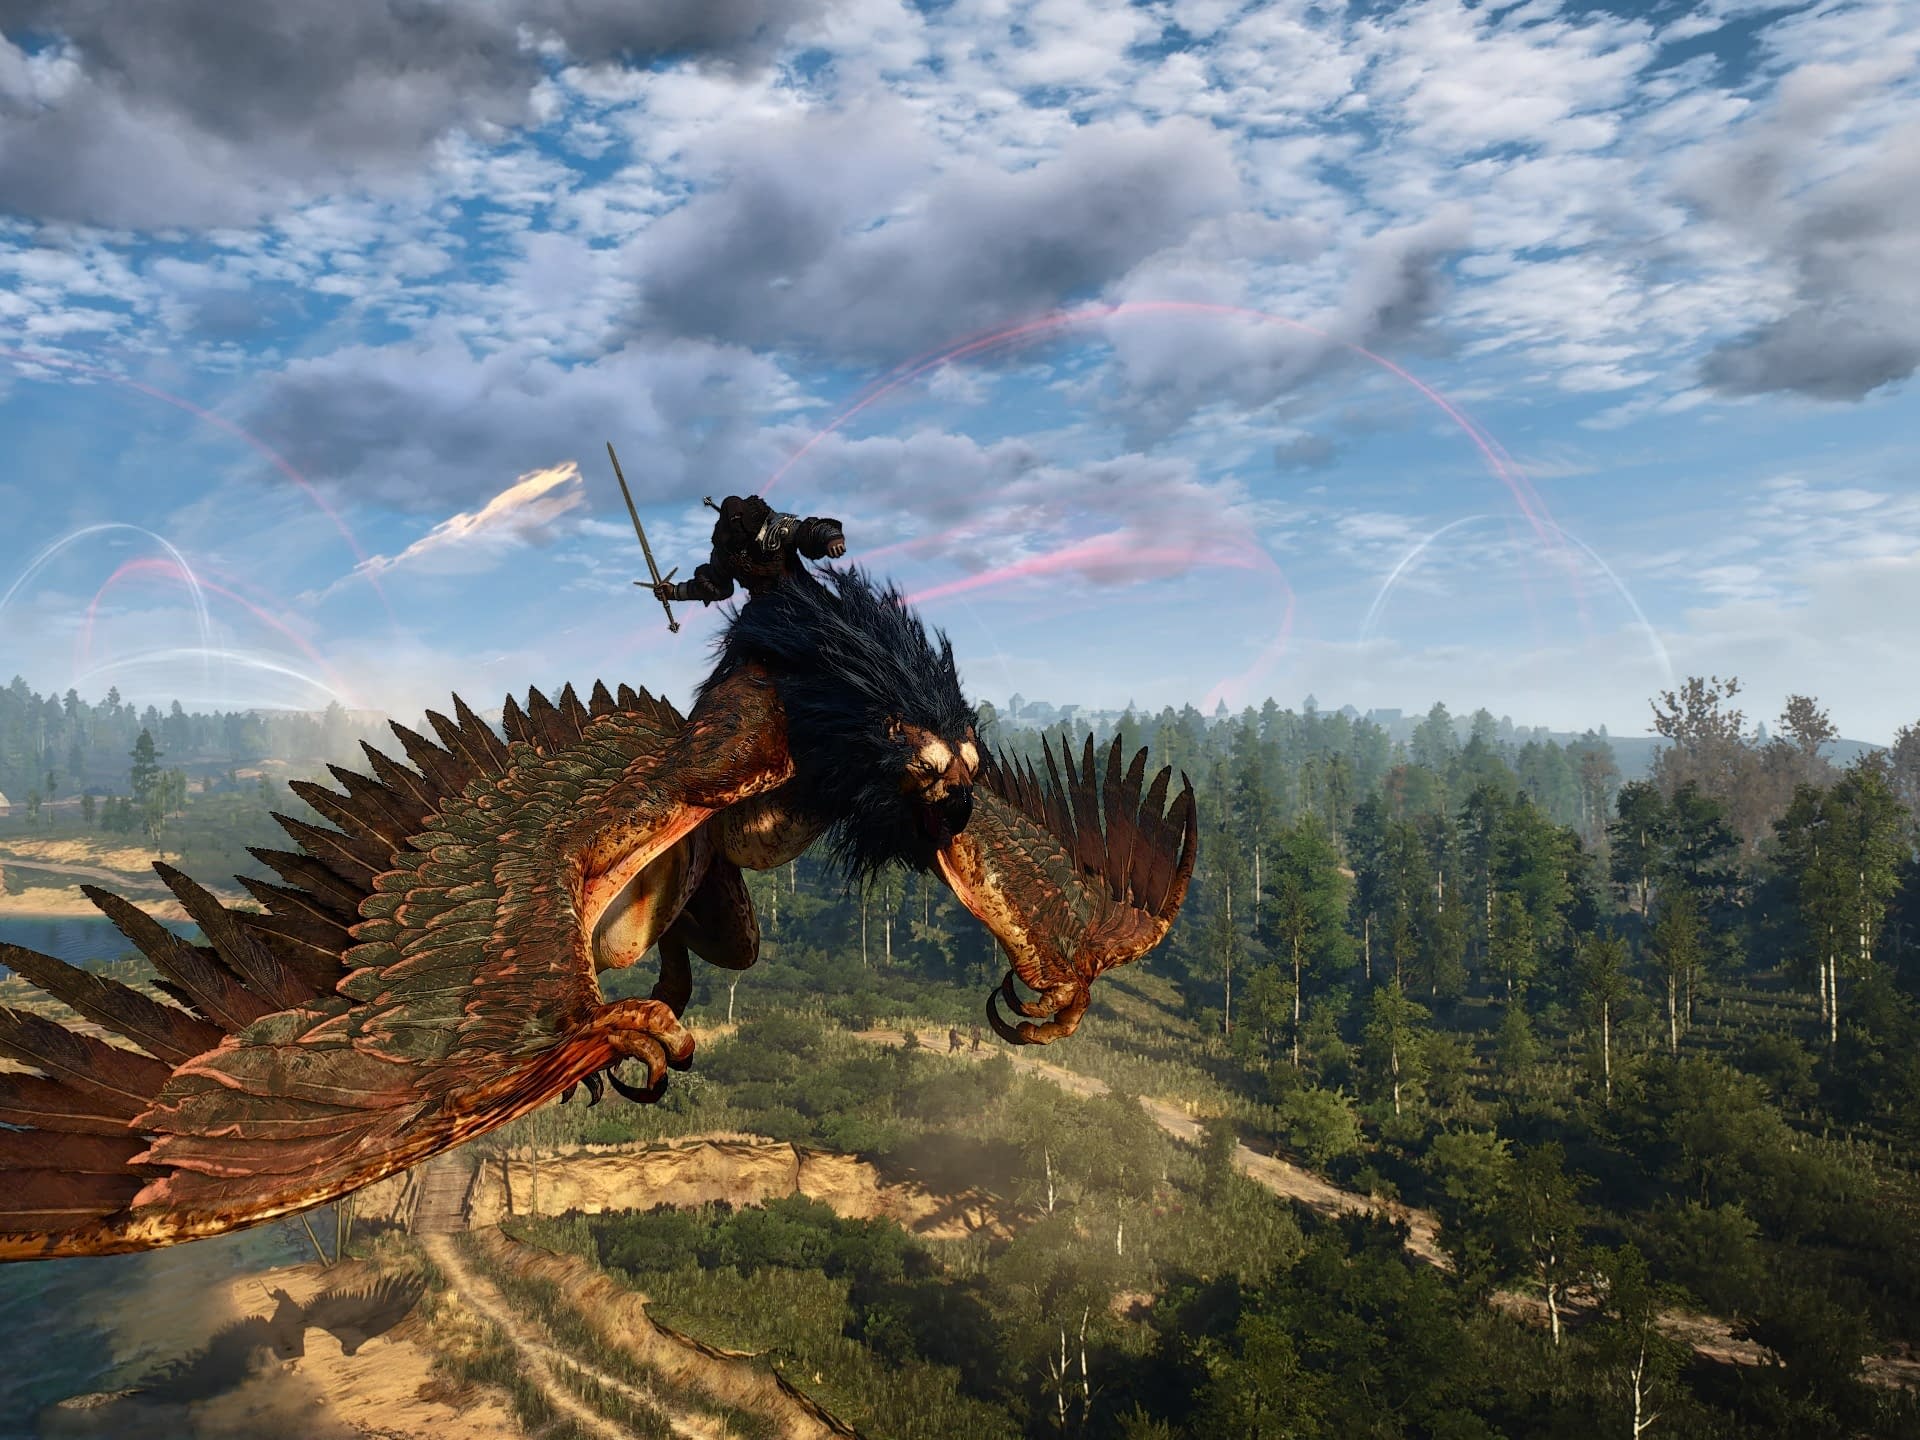 In The Witcher 3, you can now join Griffin!